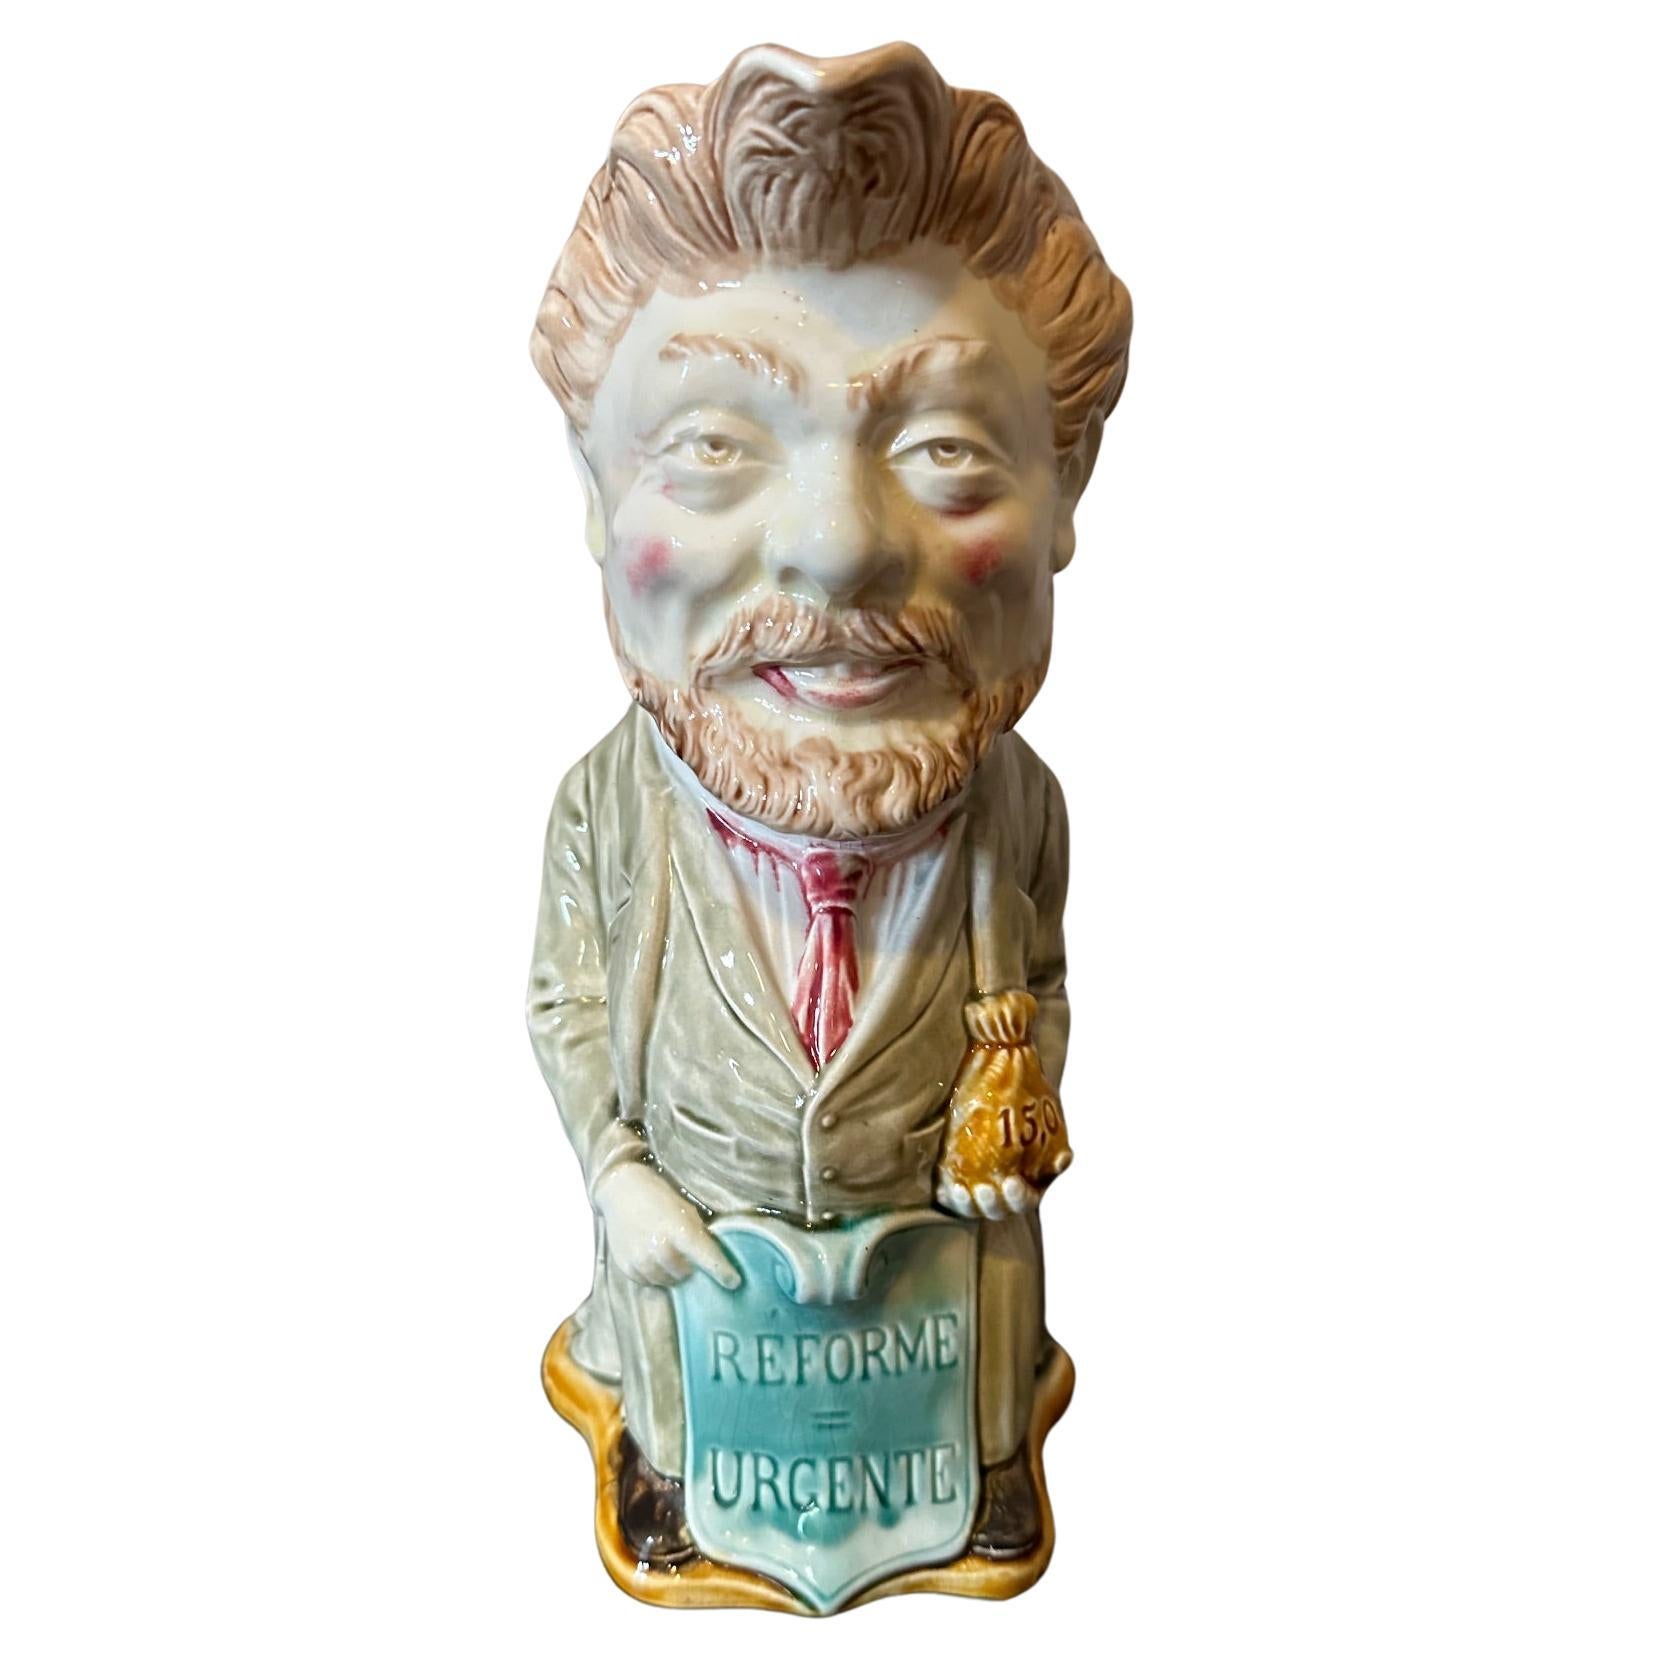 Early 20th century French Ceramic Politician man Pitcher For Sale